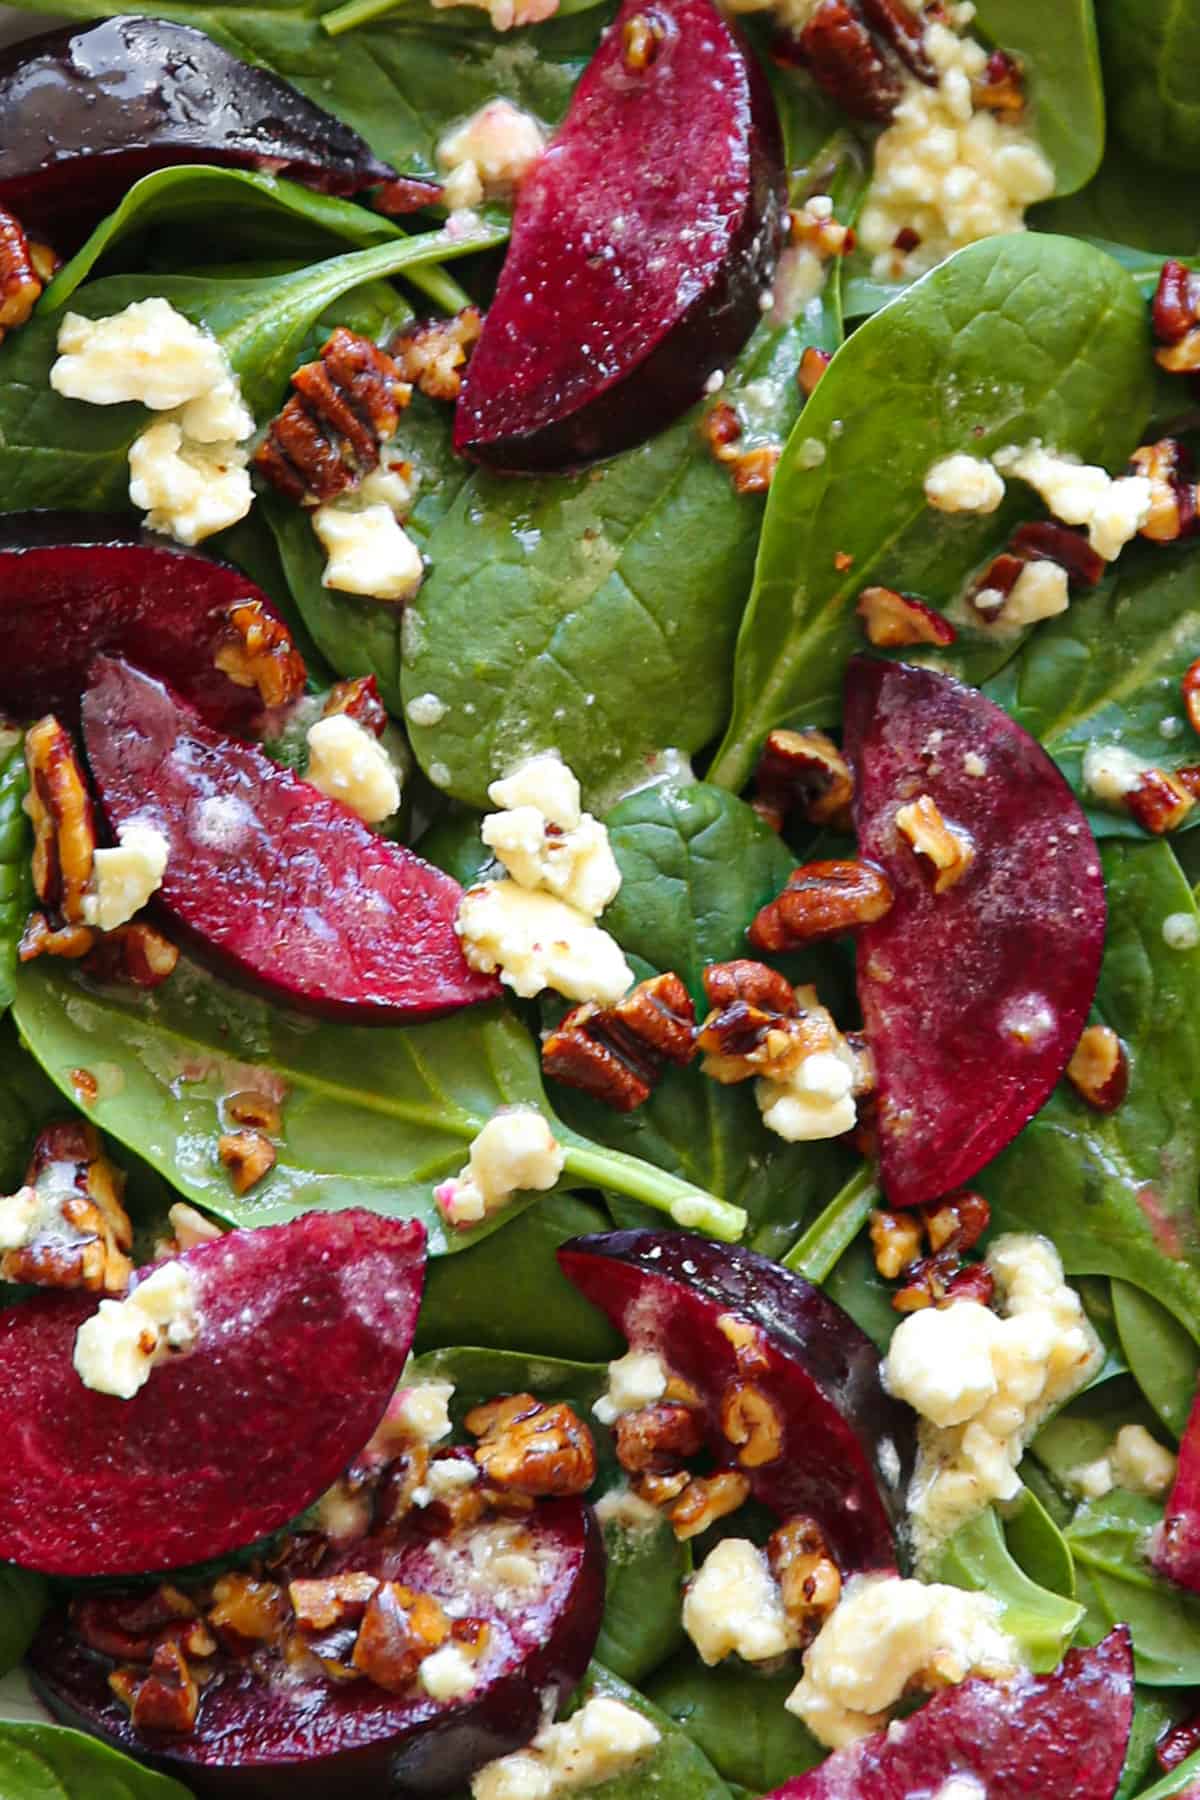 Plum Spinach Salad with Feta Cheese, Pecans, and Honey-Lemon Dressing (close-up photo).